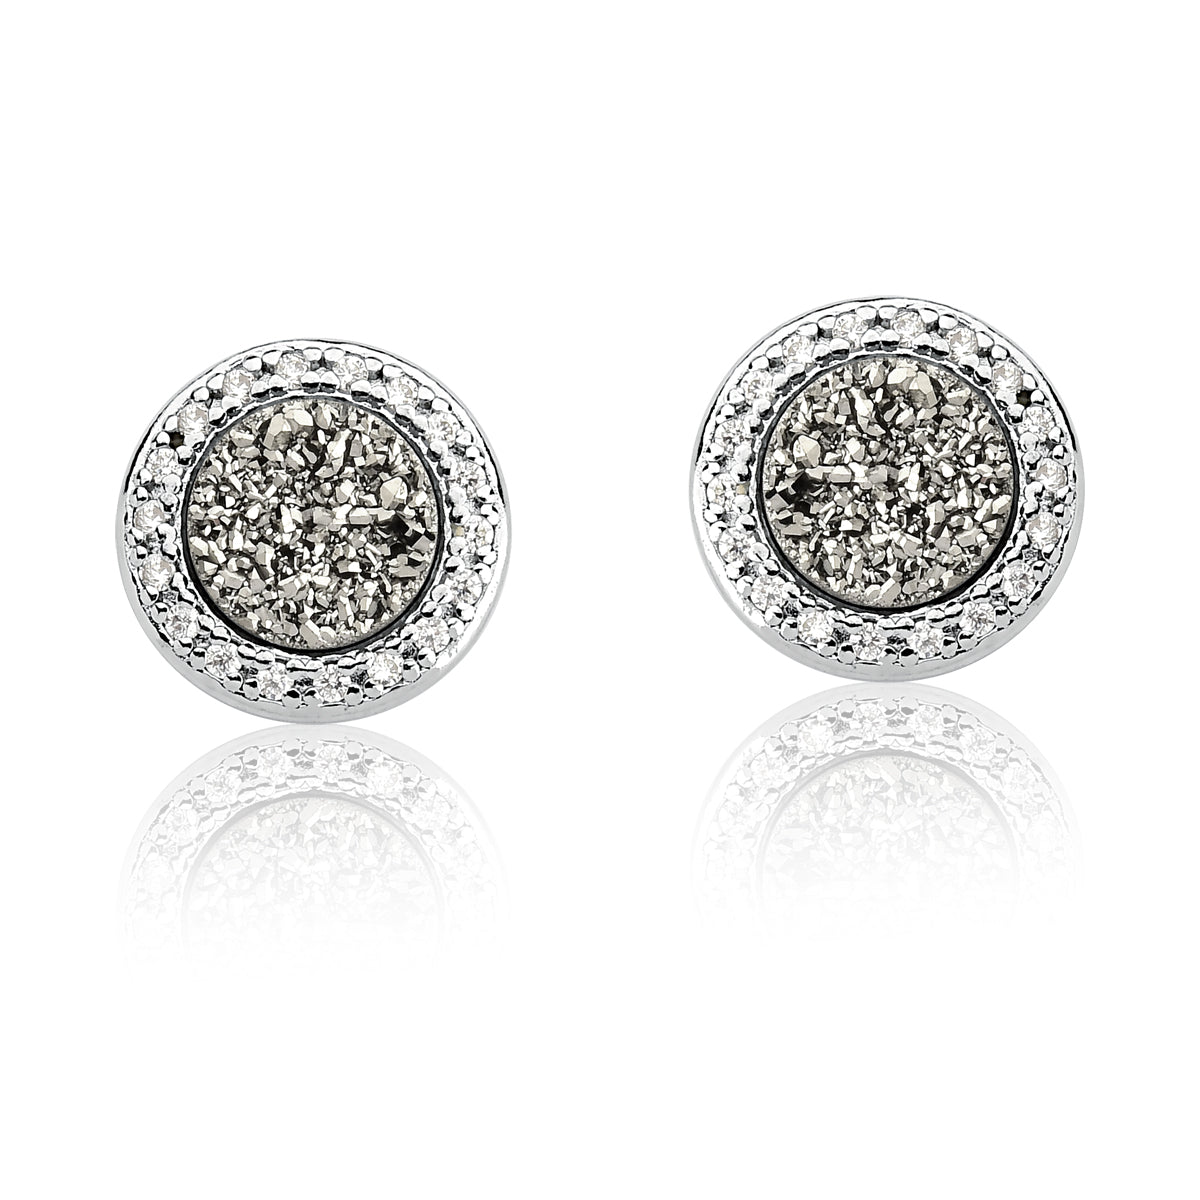 Stud Earrings in Titanium Druzy Natural Gemstones &amp; Pave Clear Cubic Zirconia Studded | Rhodium Plated